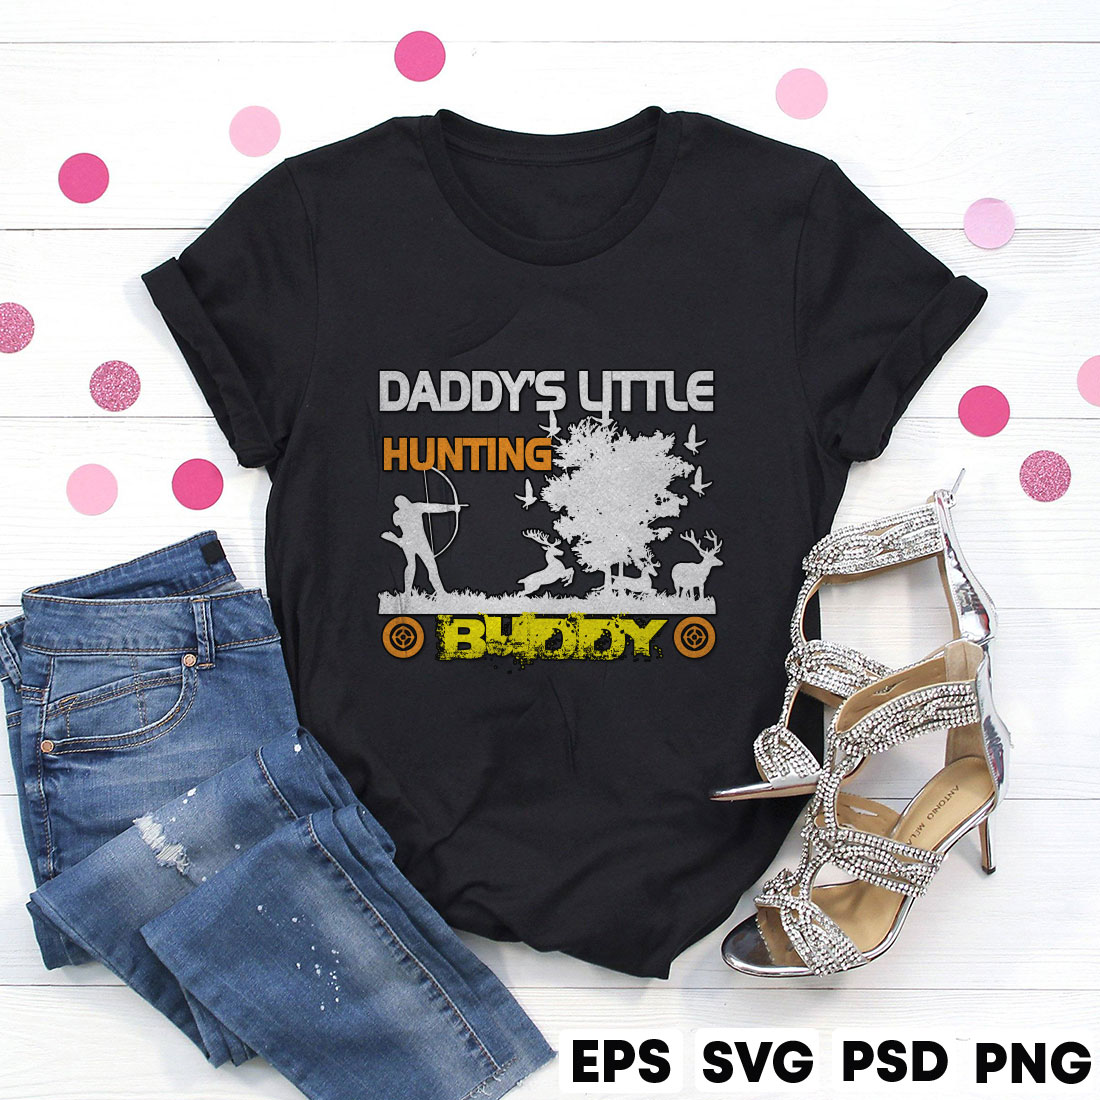 daddy\\\'s little hunting buddy cover image.